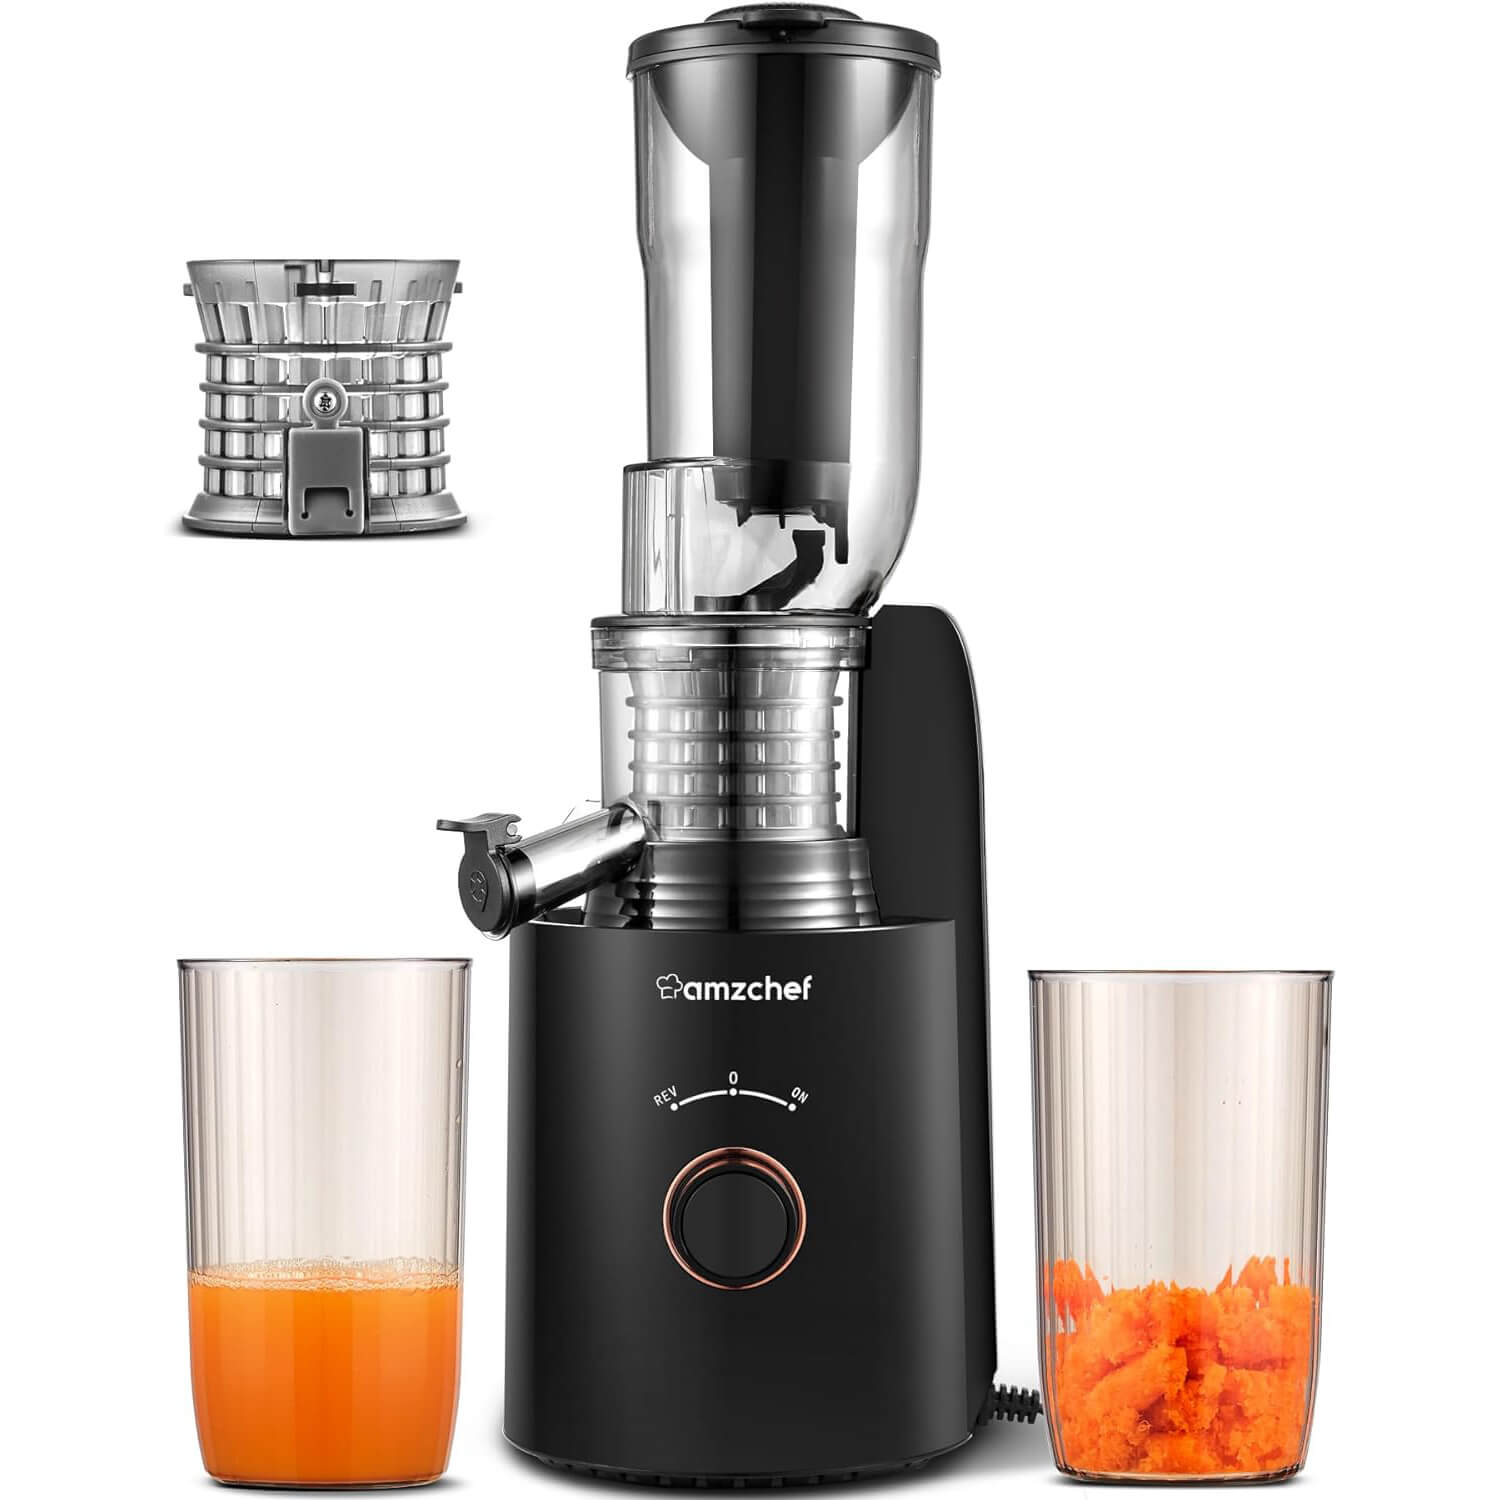 AMZCHEF Compact Slow Masticating Juicer 3" Wide Chute Black